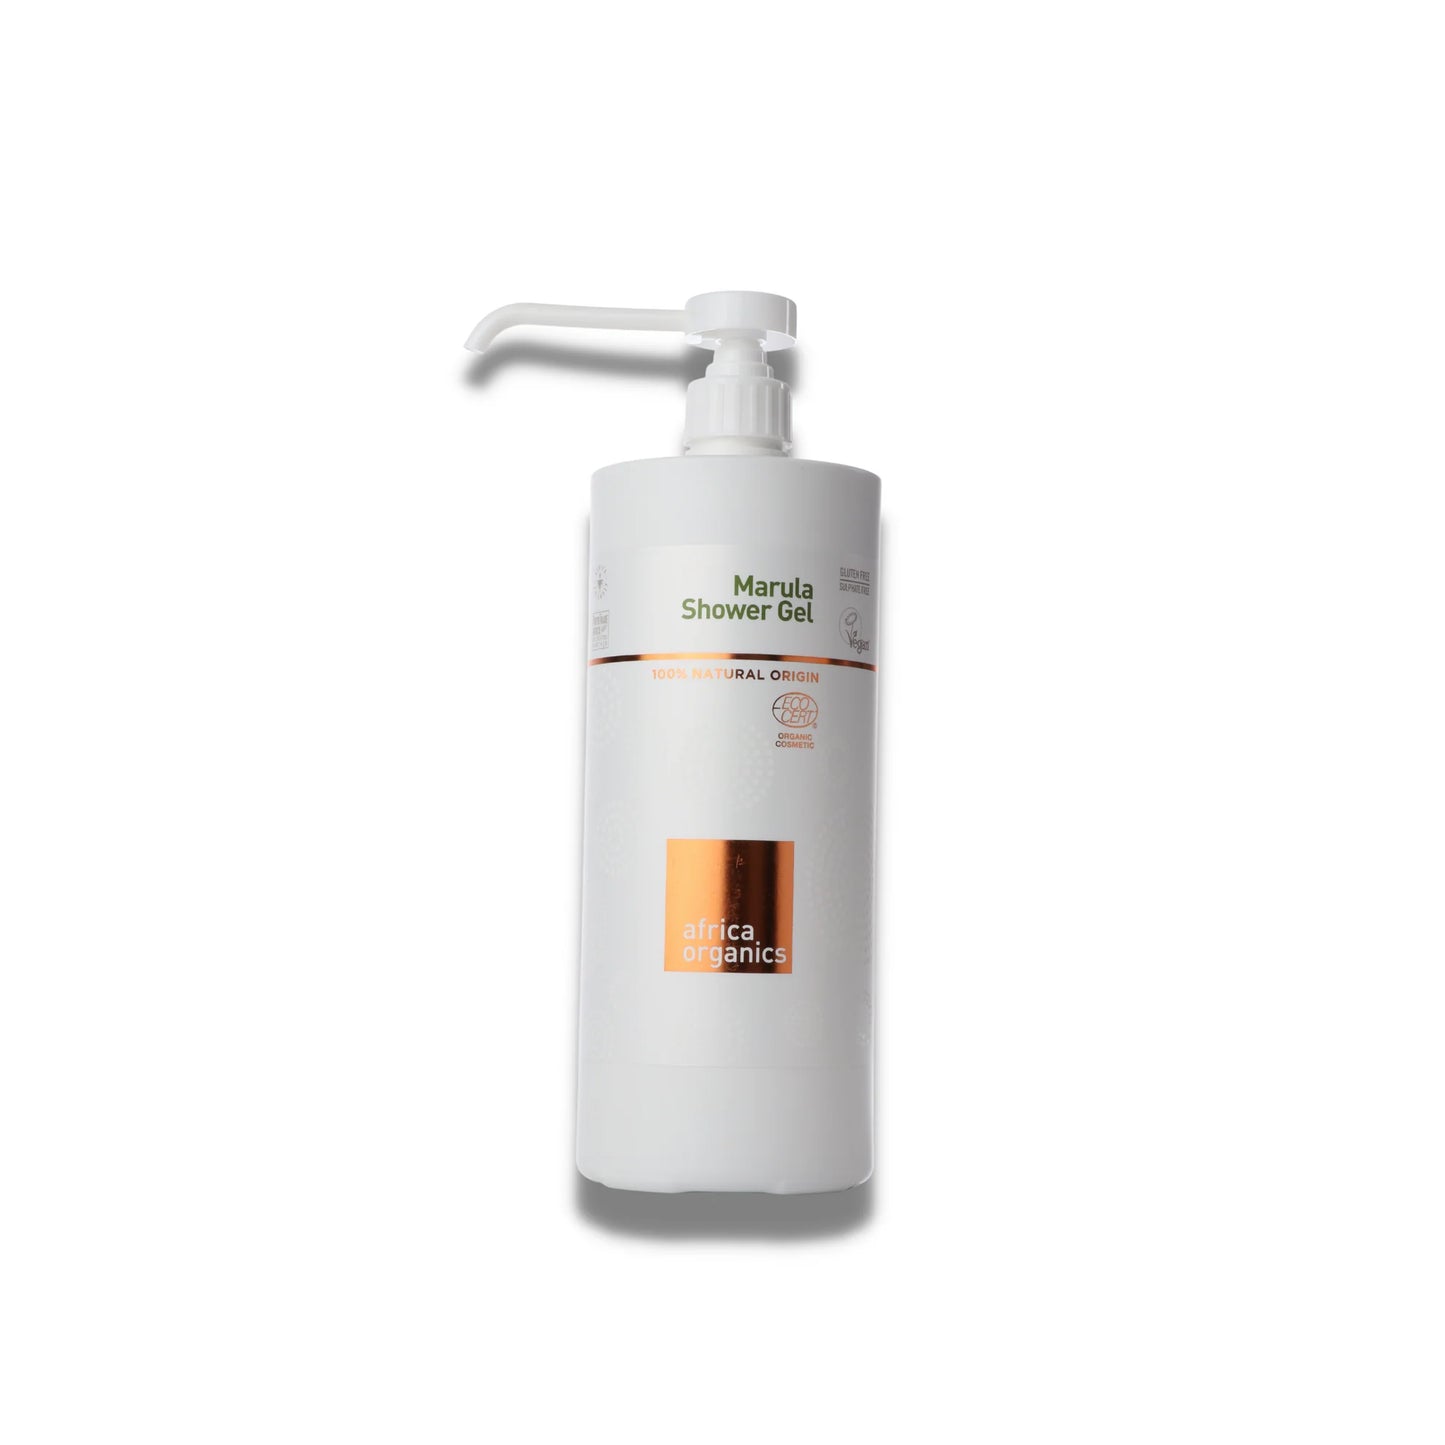 Marula Oil Showergel enriched with natural extracts for nourishment and freshness.